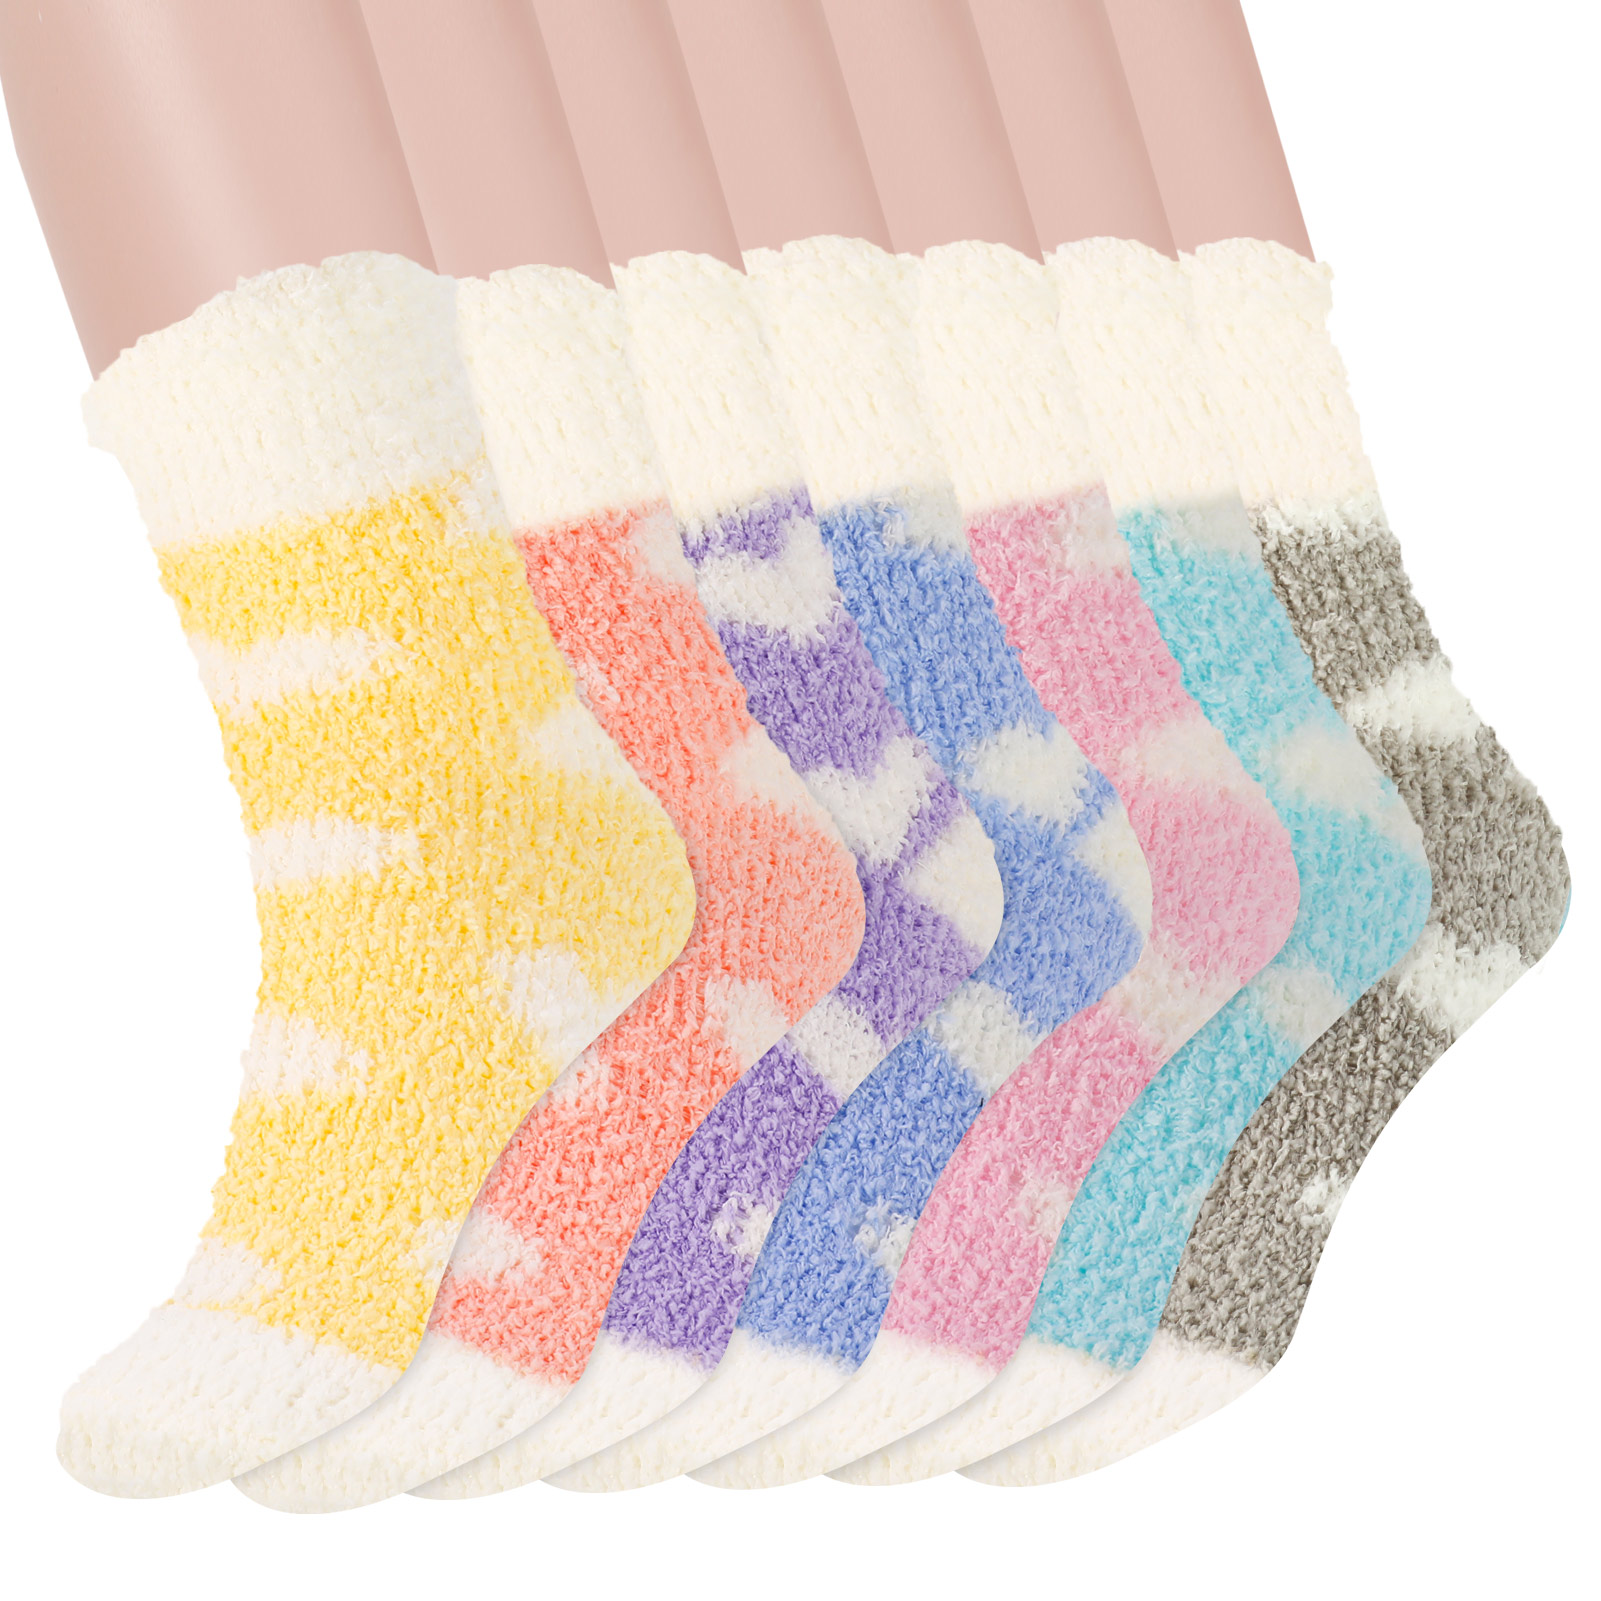 Qweryboo 7Pairs Fuzzy Socks for Women, Warm Soft Fluffy Socks for Girls ...